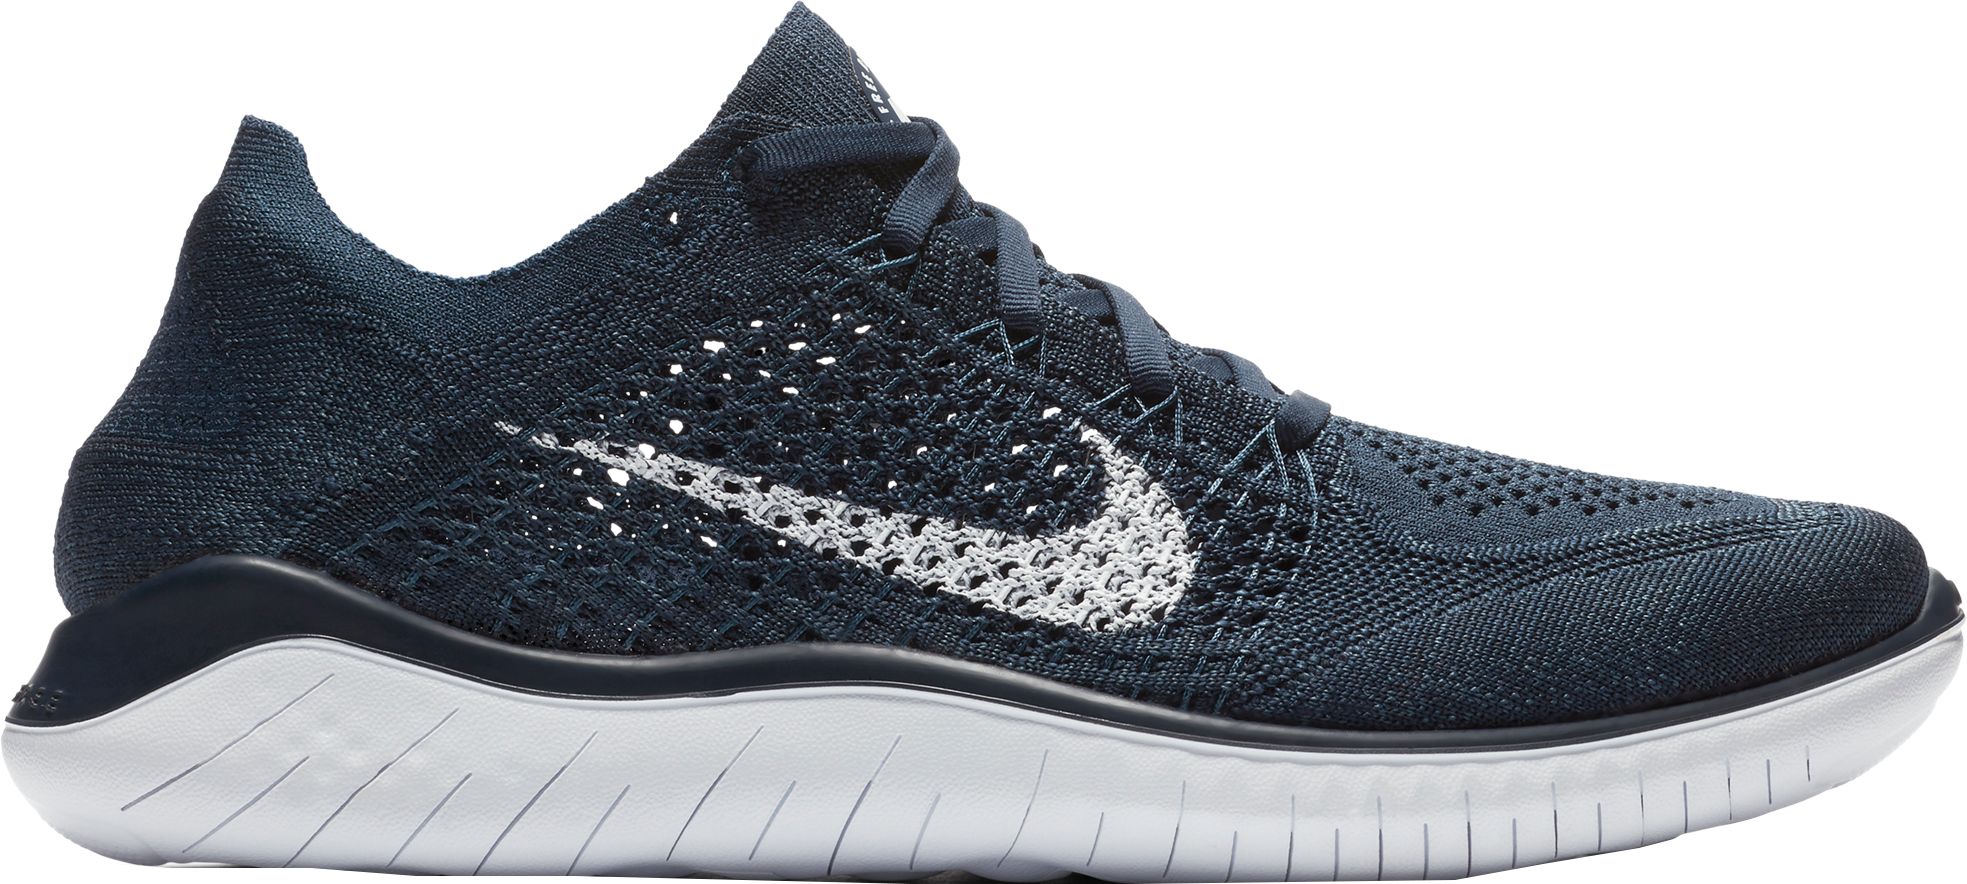 mens flyknit shoes